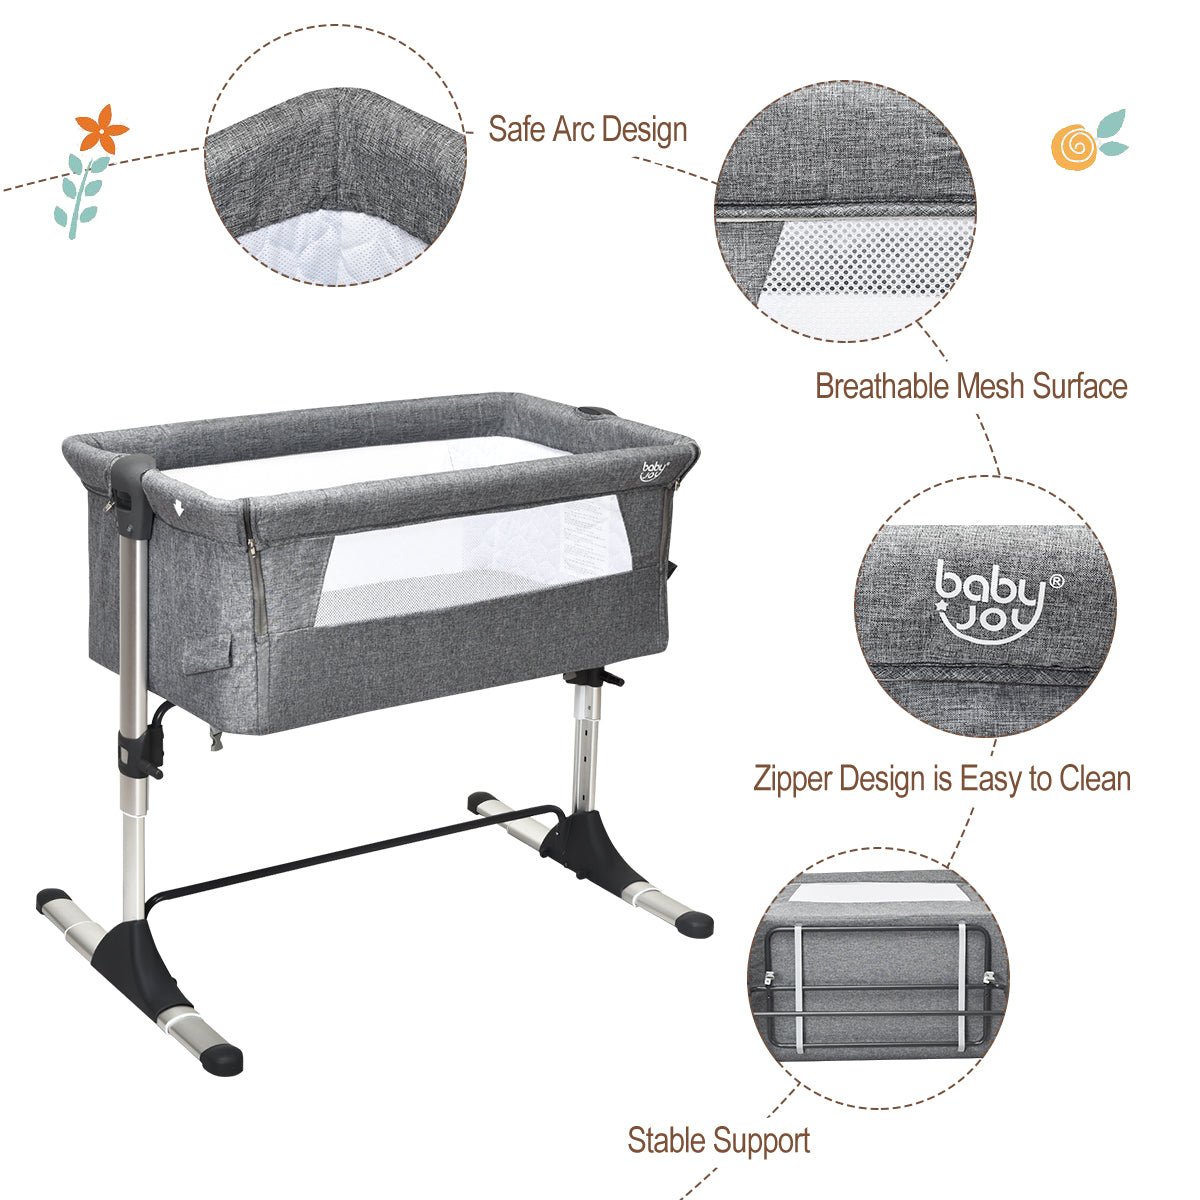 Adjustable Height Baby Bassinet - Soft Mattress & Handy Carry Bag for Parents